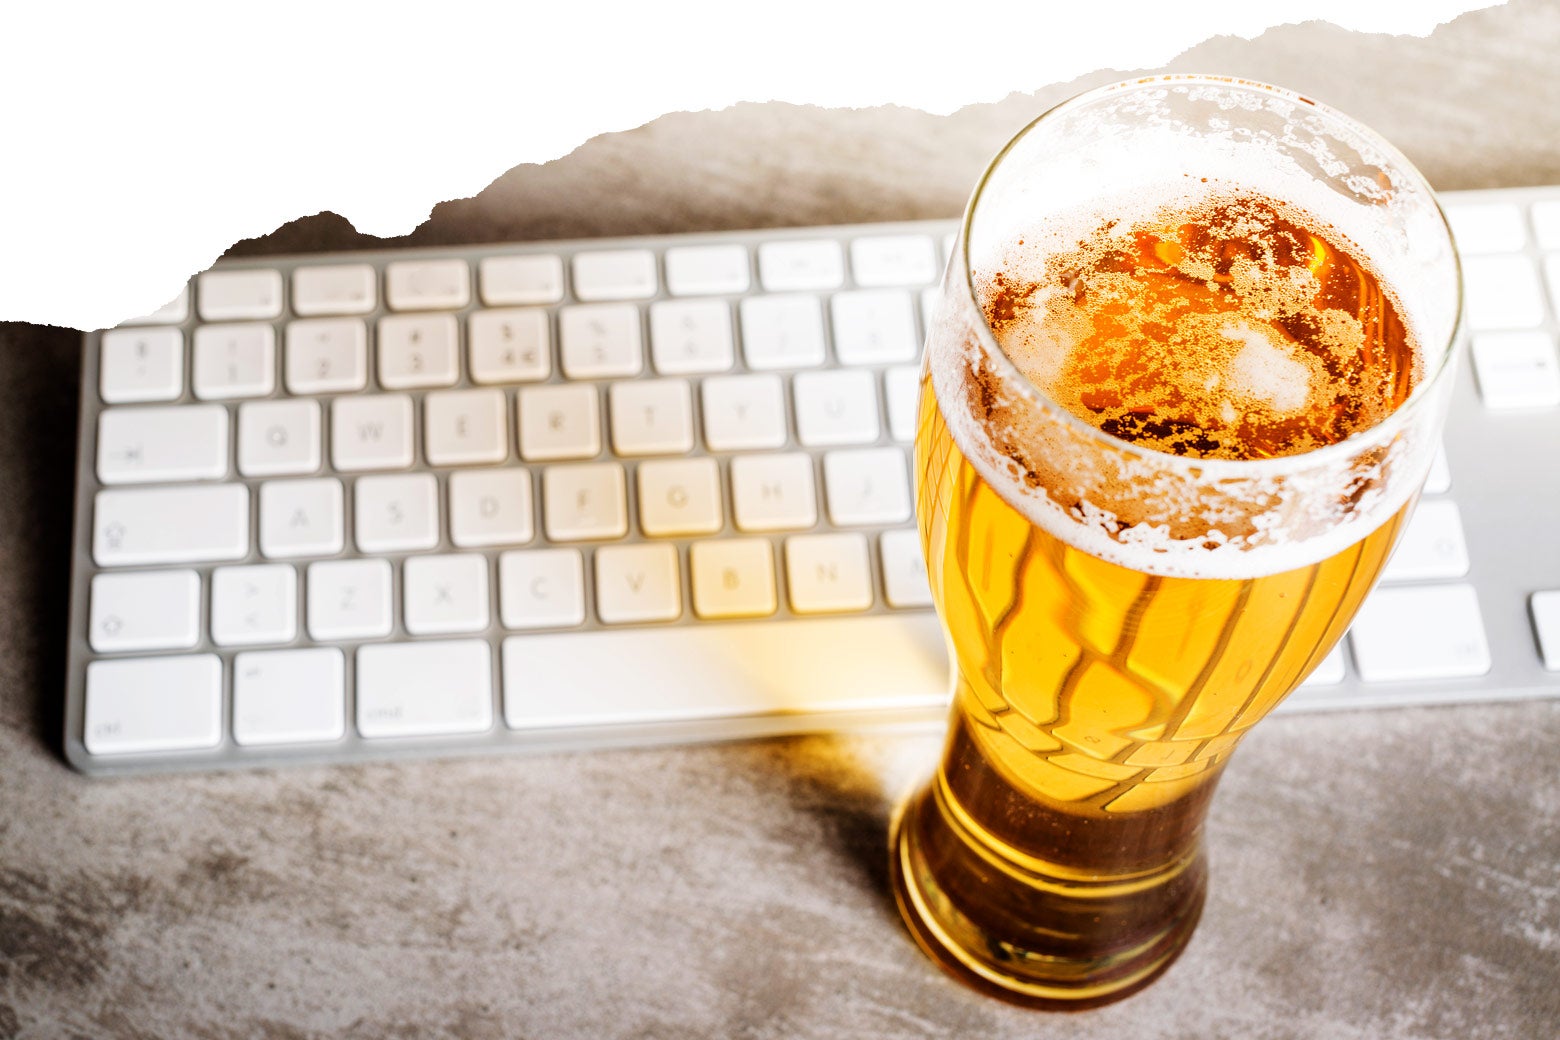 Beer and keyboard.